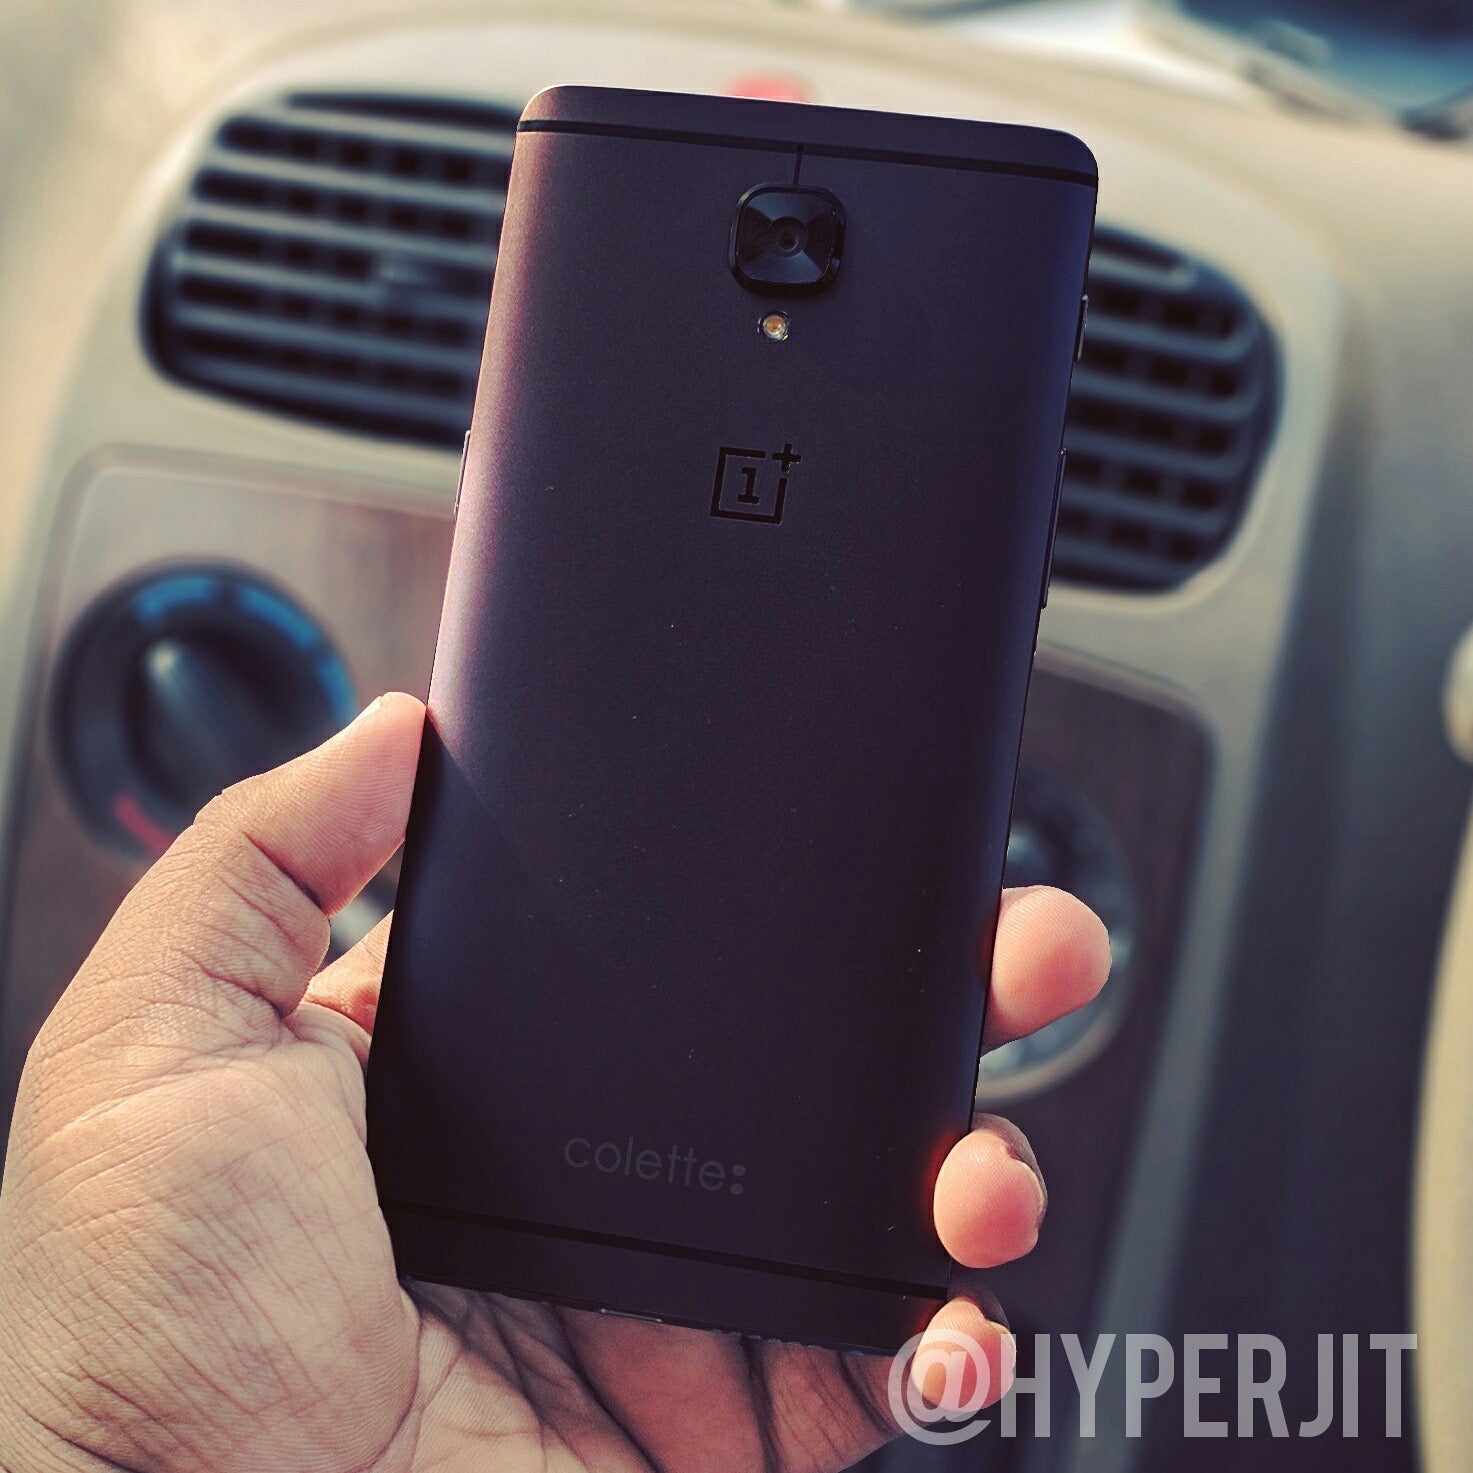 Is your OnePlus 3 or 3T camera bump slightly tilted? (false alarm)